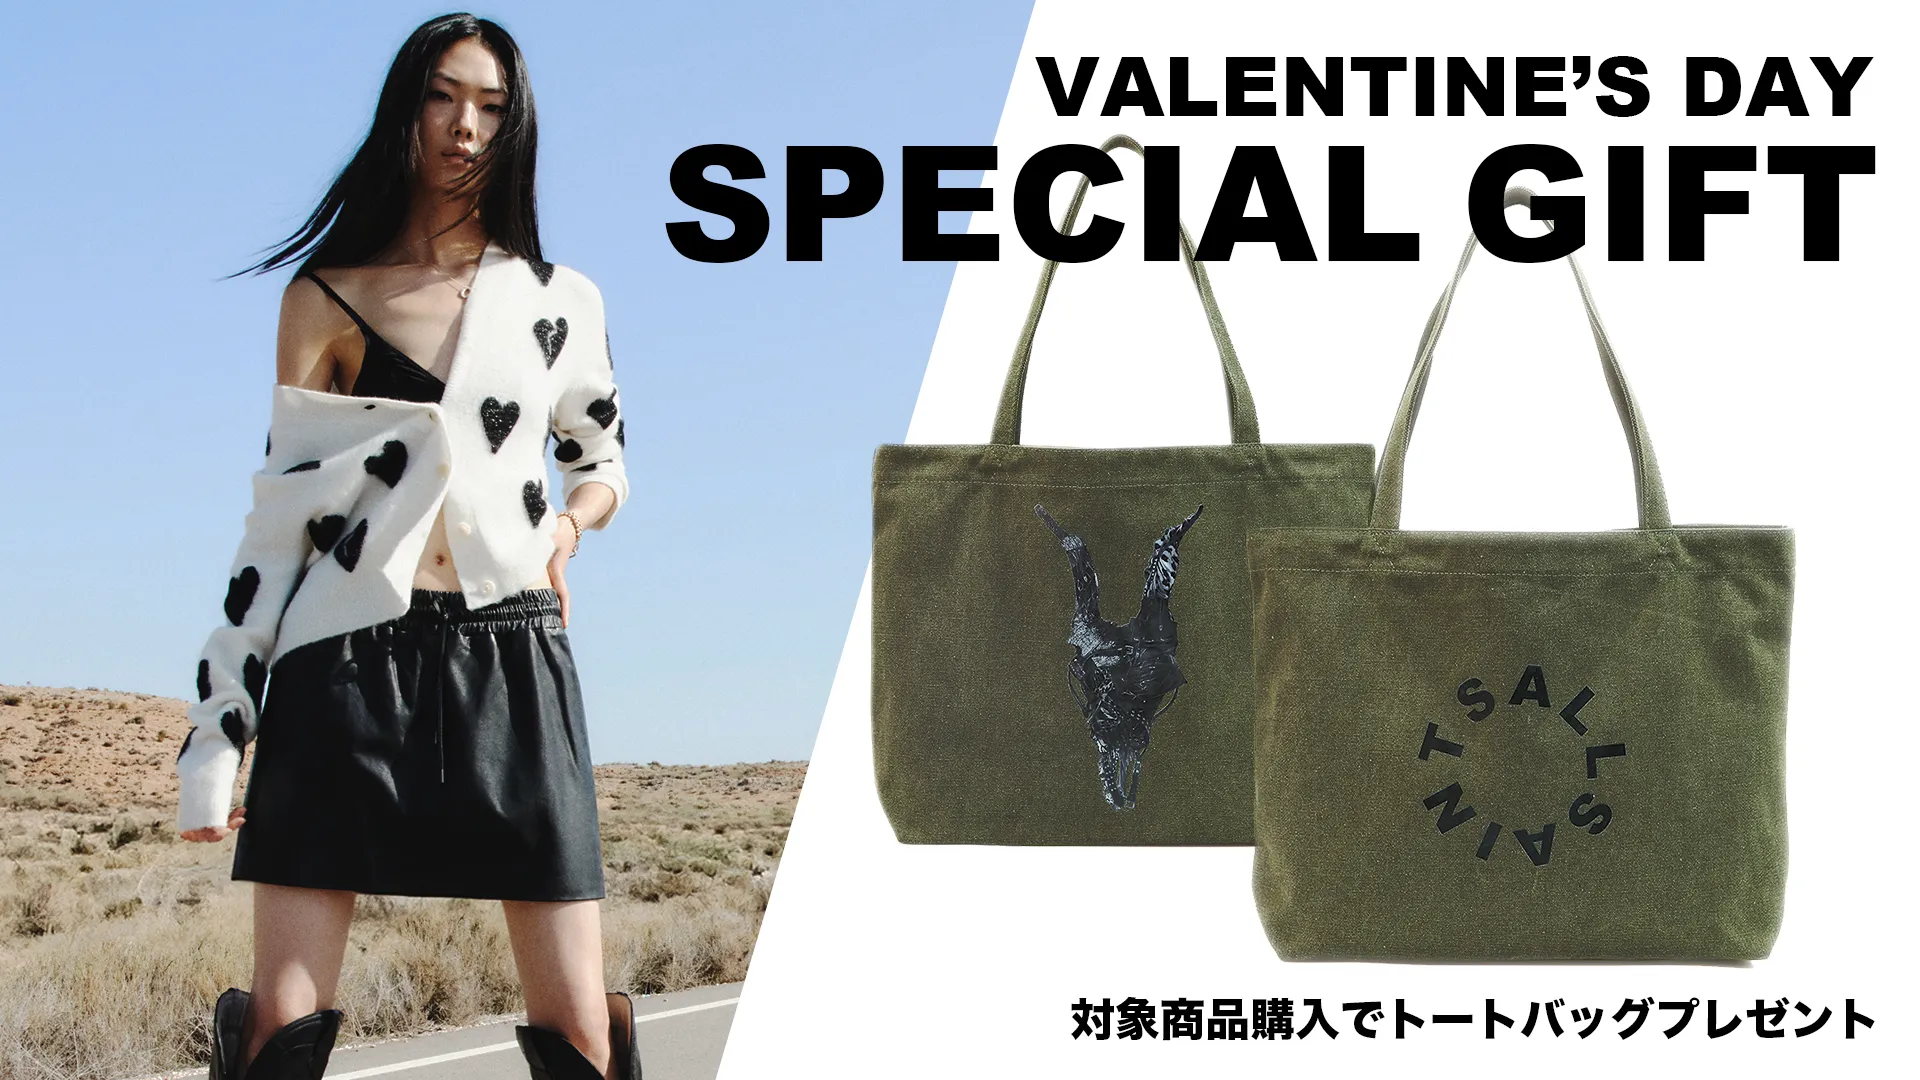 Valentaine's Day Special Gift